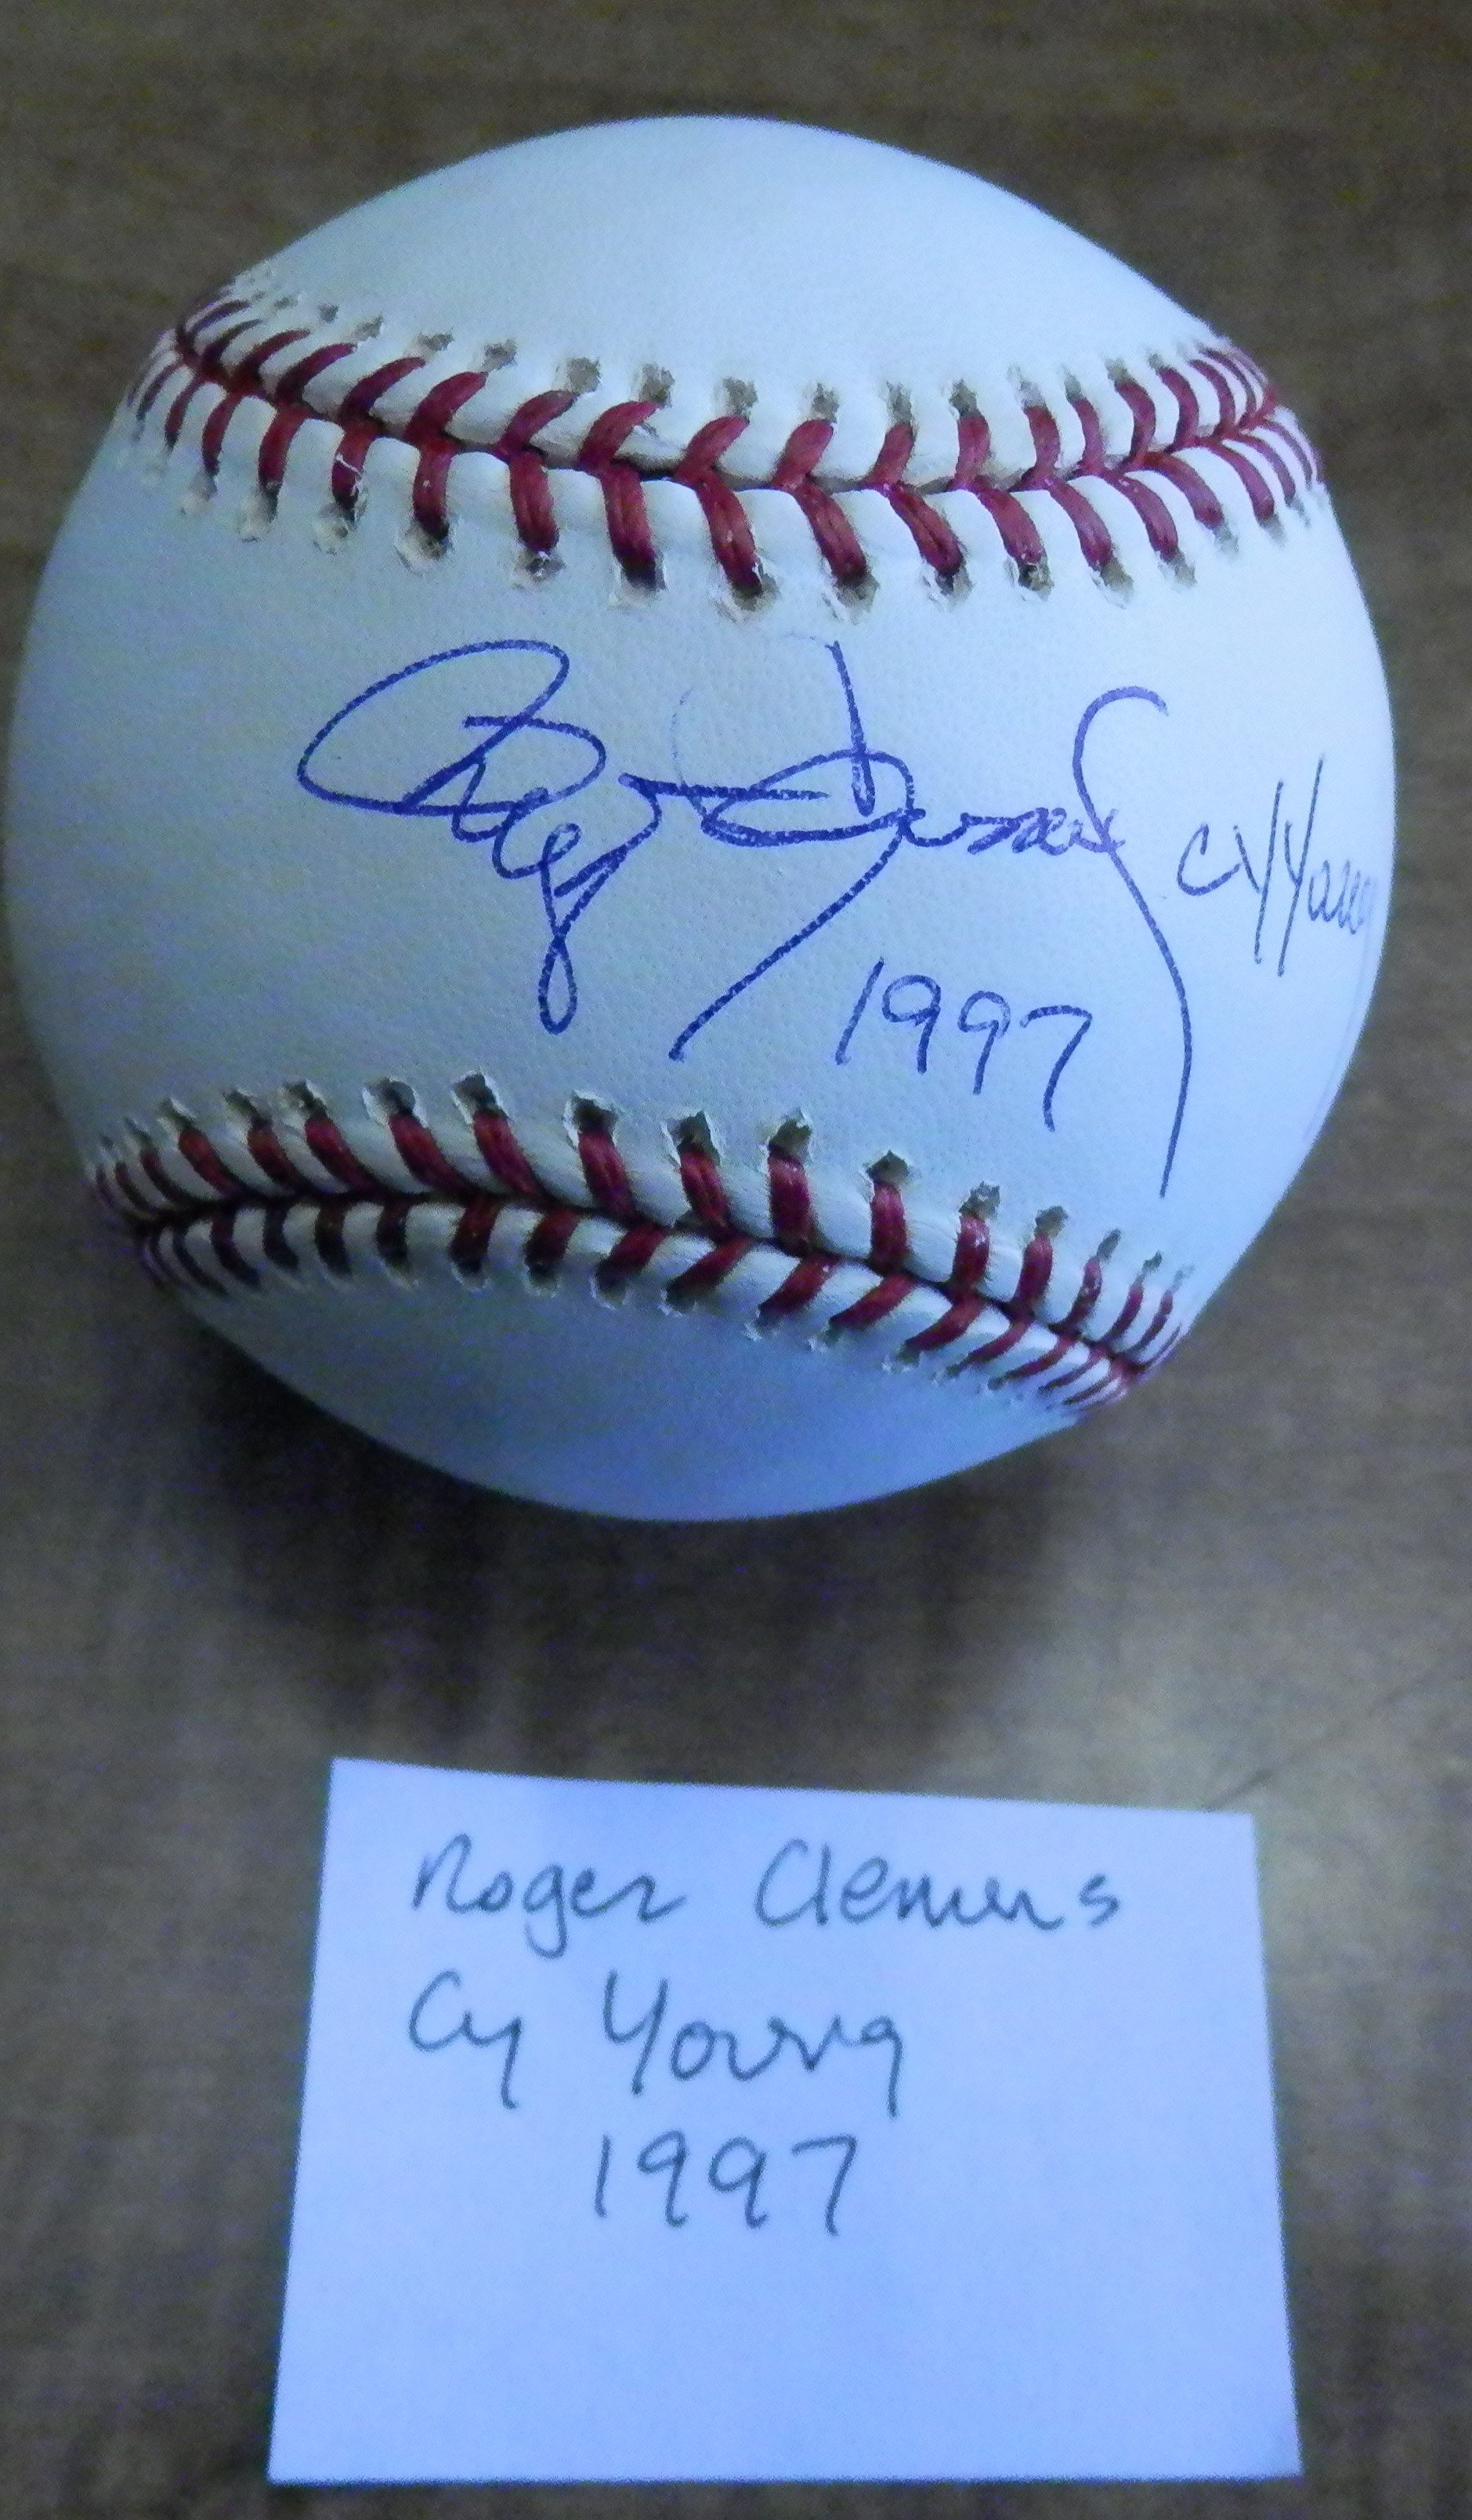 1997  Roger Clemens cy your.JPG